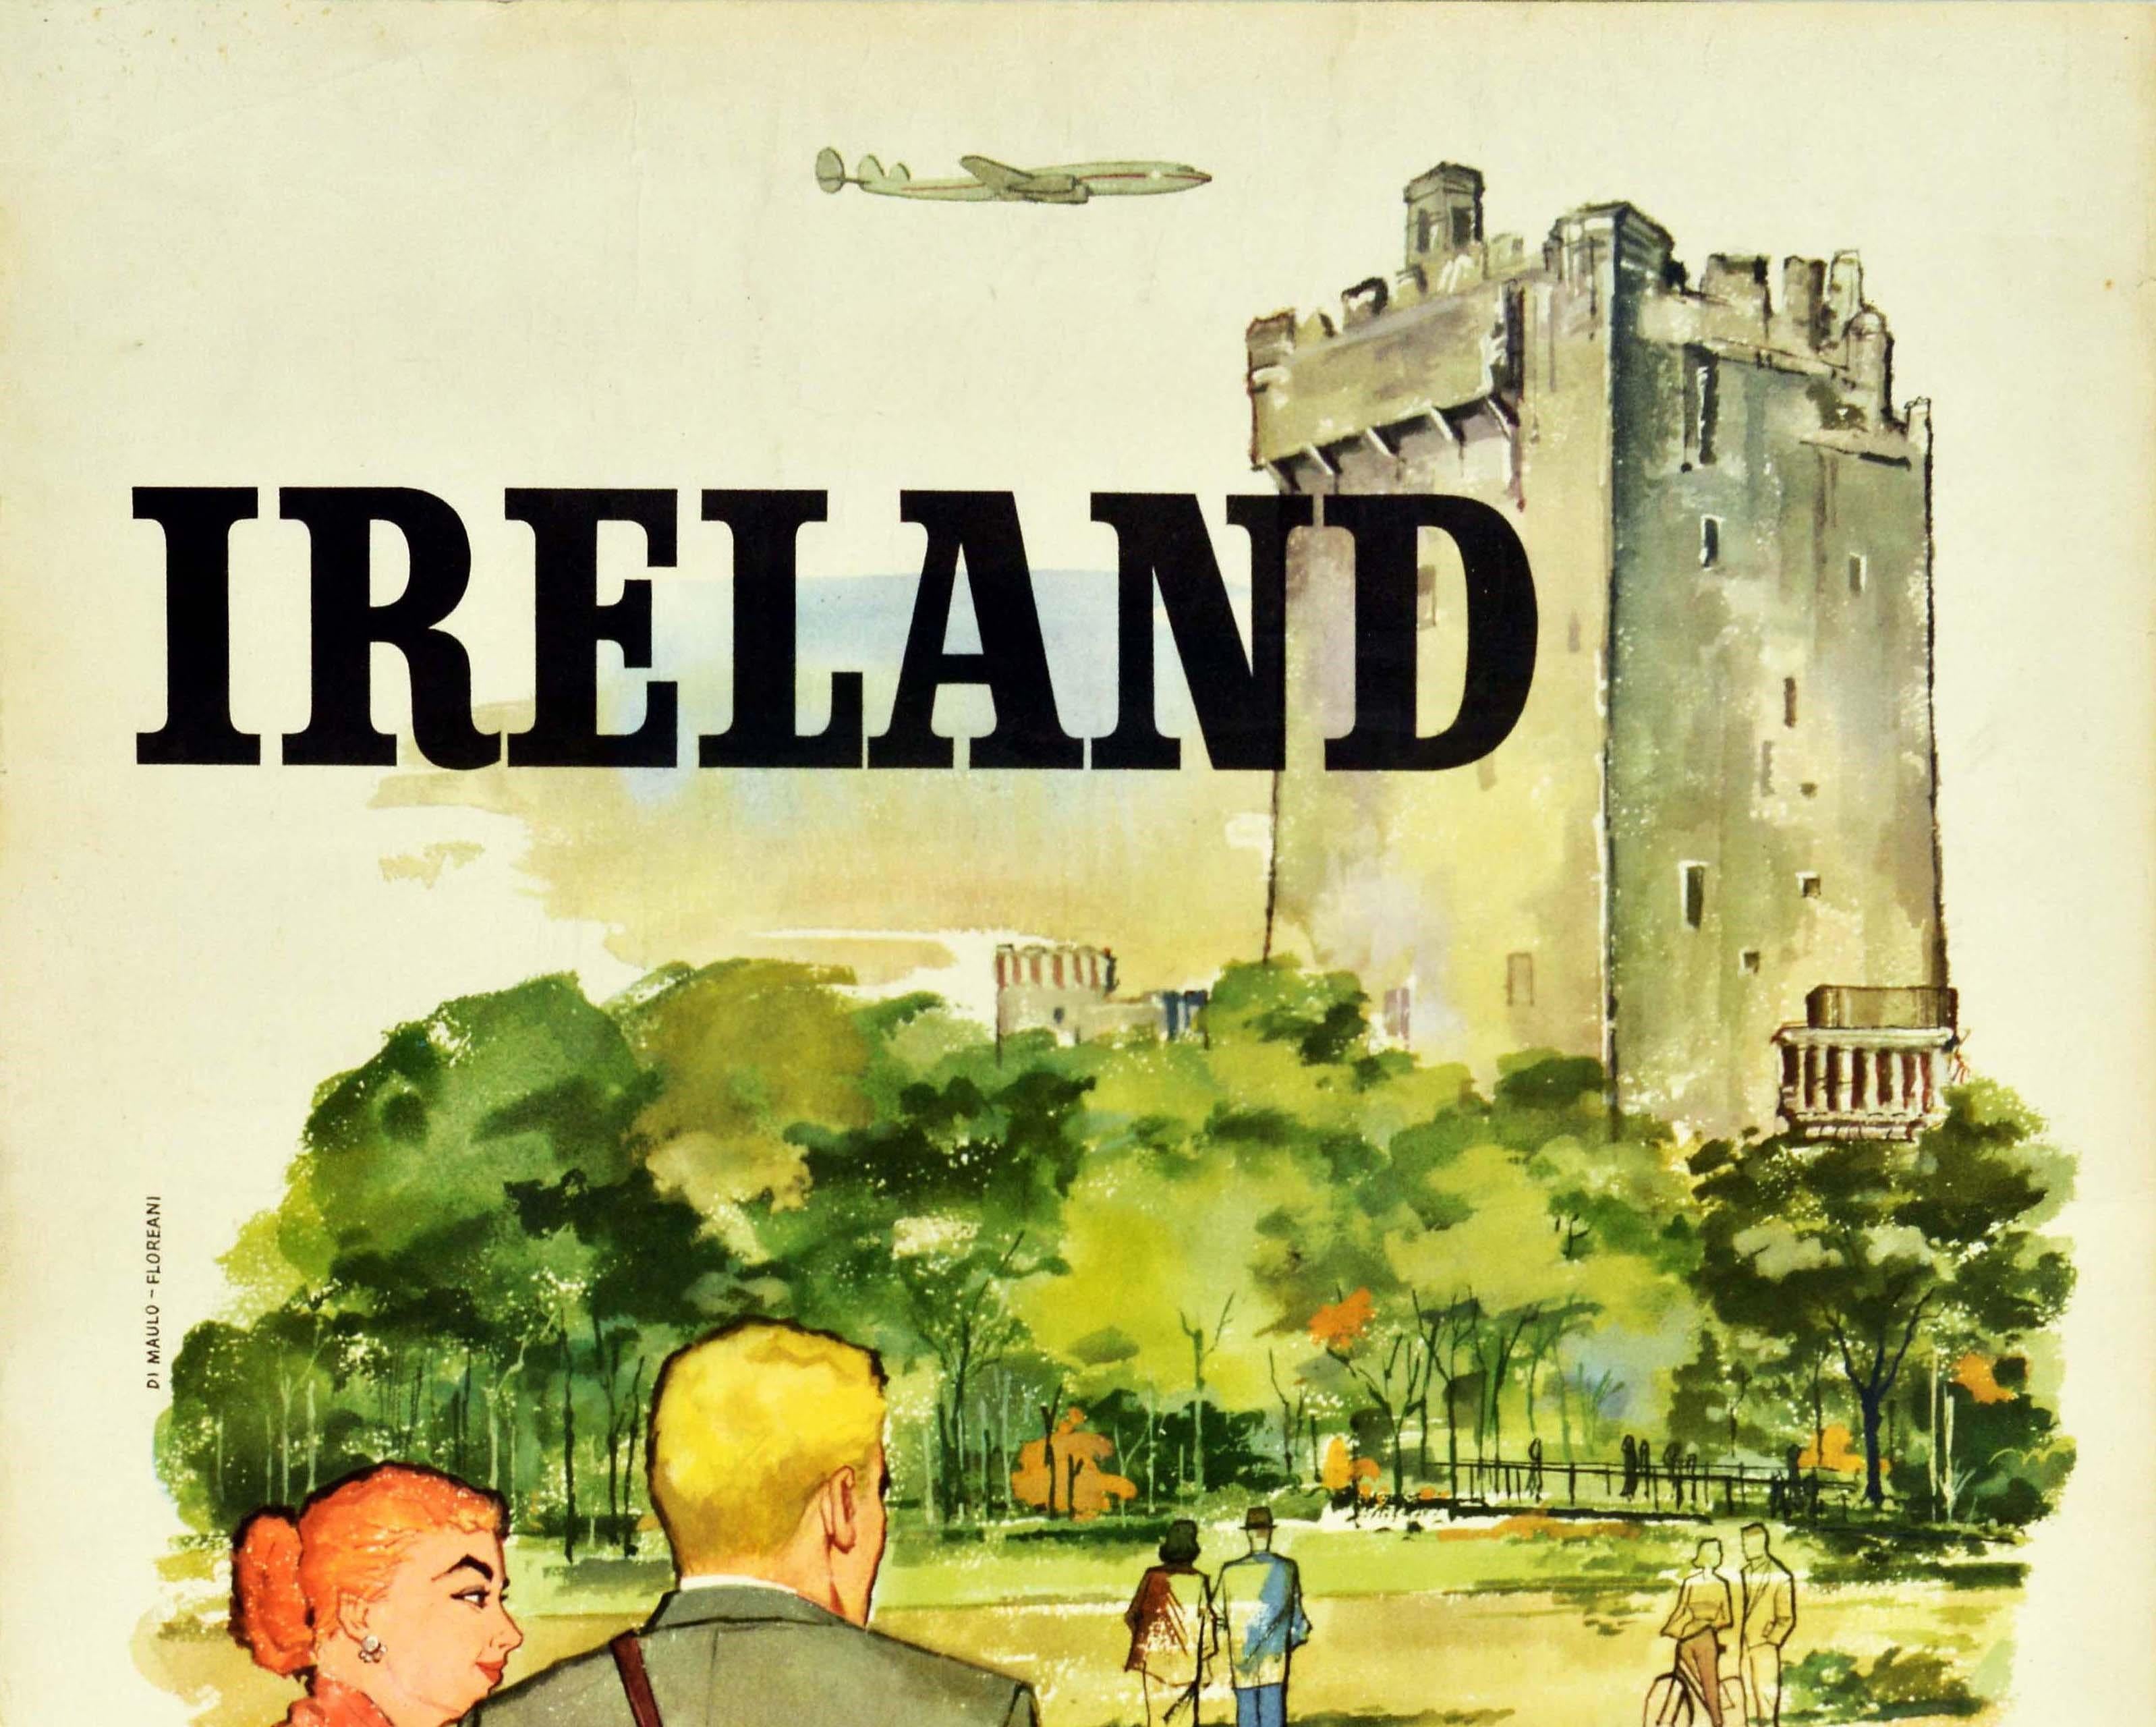 Original vintage travel poster for Ireland Trans-Canada Air Lines featuring a scenic image of two tourists in the foreground, the lady smiling with her hand on the man's shoulder, looking towards the medieval Blarney Castle in Country Cork